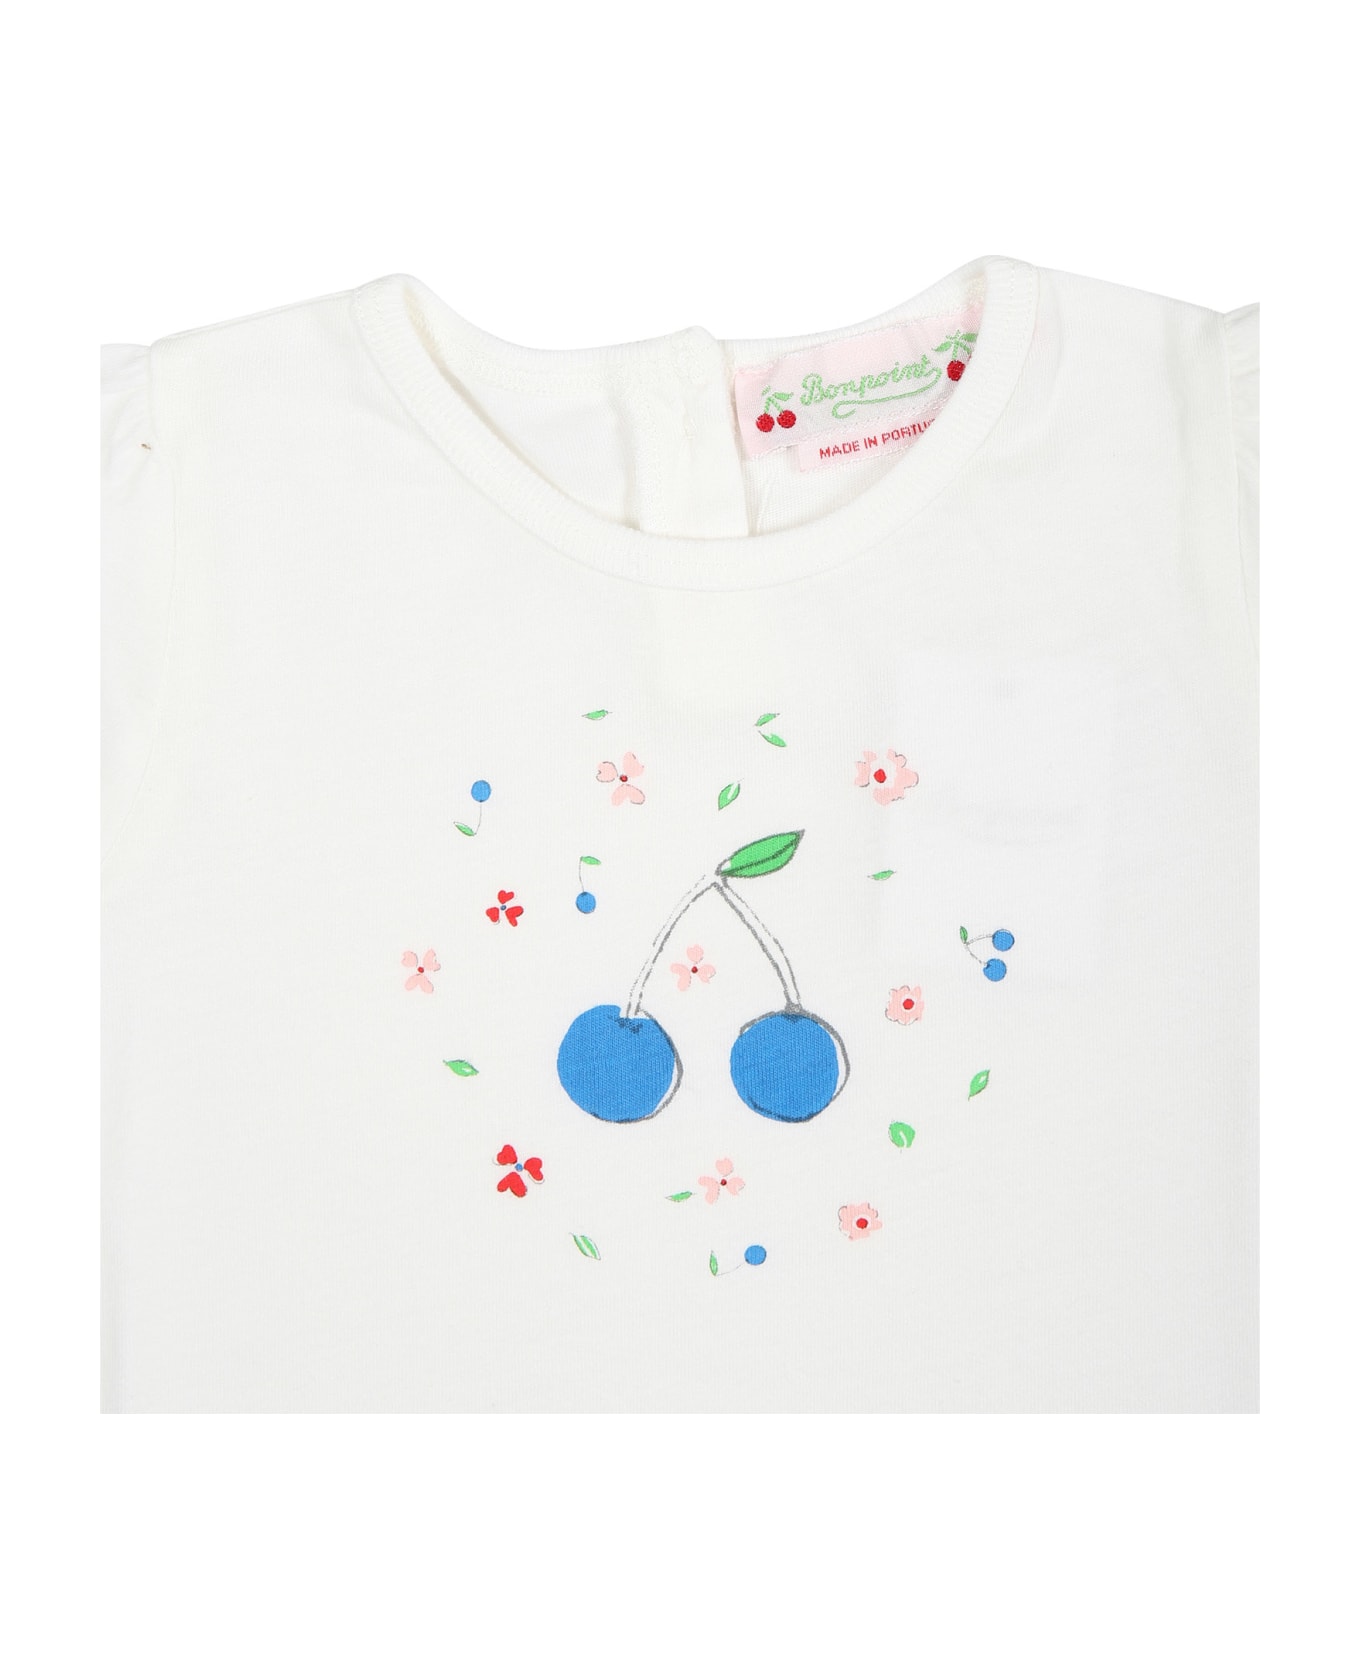 Bonpoint White T-shirt For Baby Girl With Cherries - White